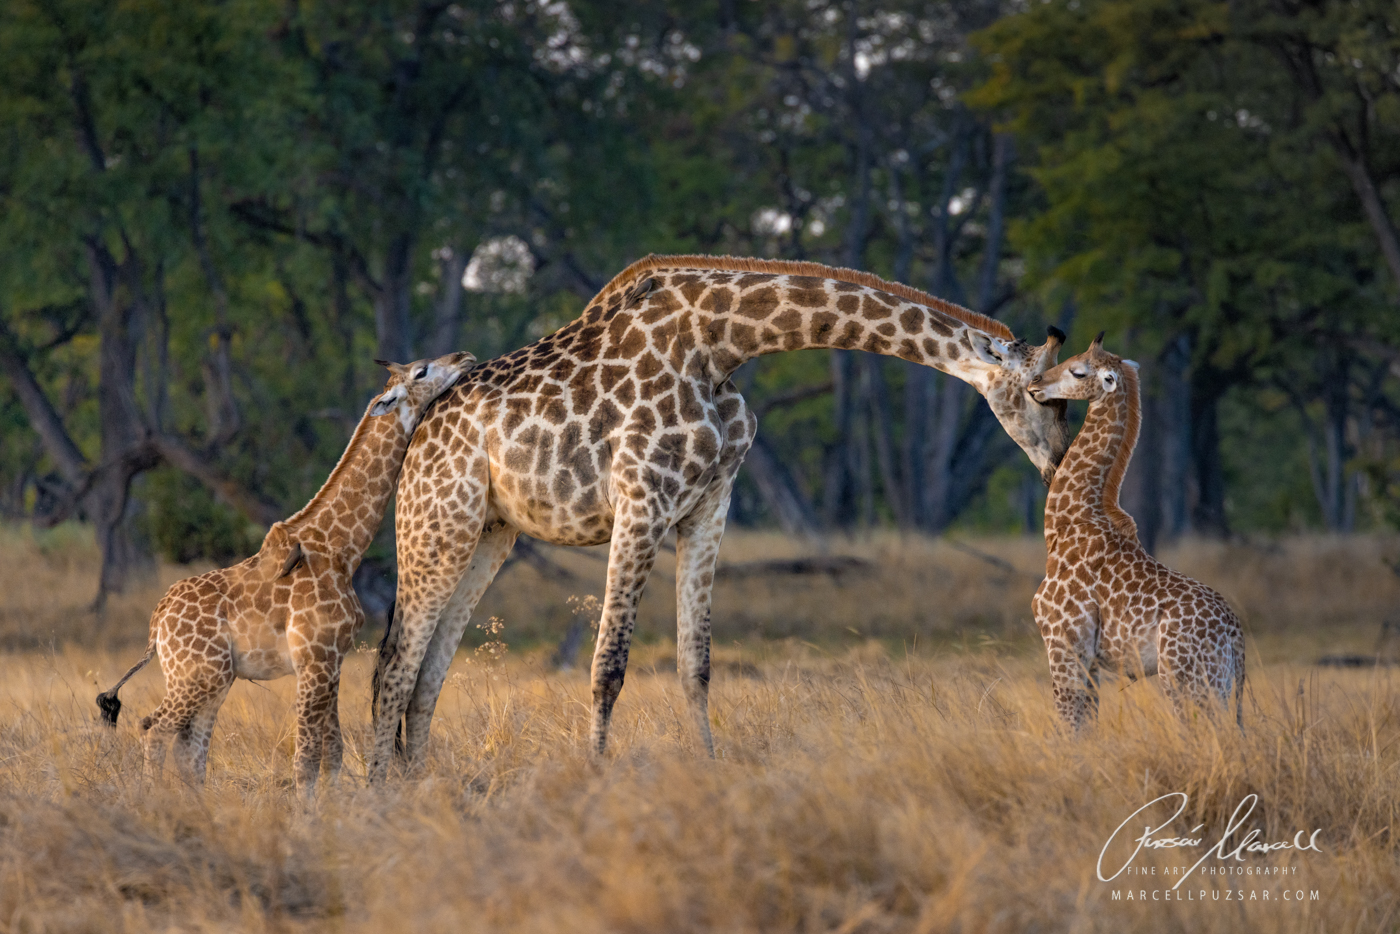 Motherly Love, Giraffes I.  An intimate moment. Giraffe mum (cow) is caring for her 2 calves in Moremi Game Reserve, Botswana.

Fine Art Limited Edition of 35